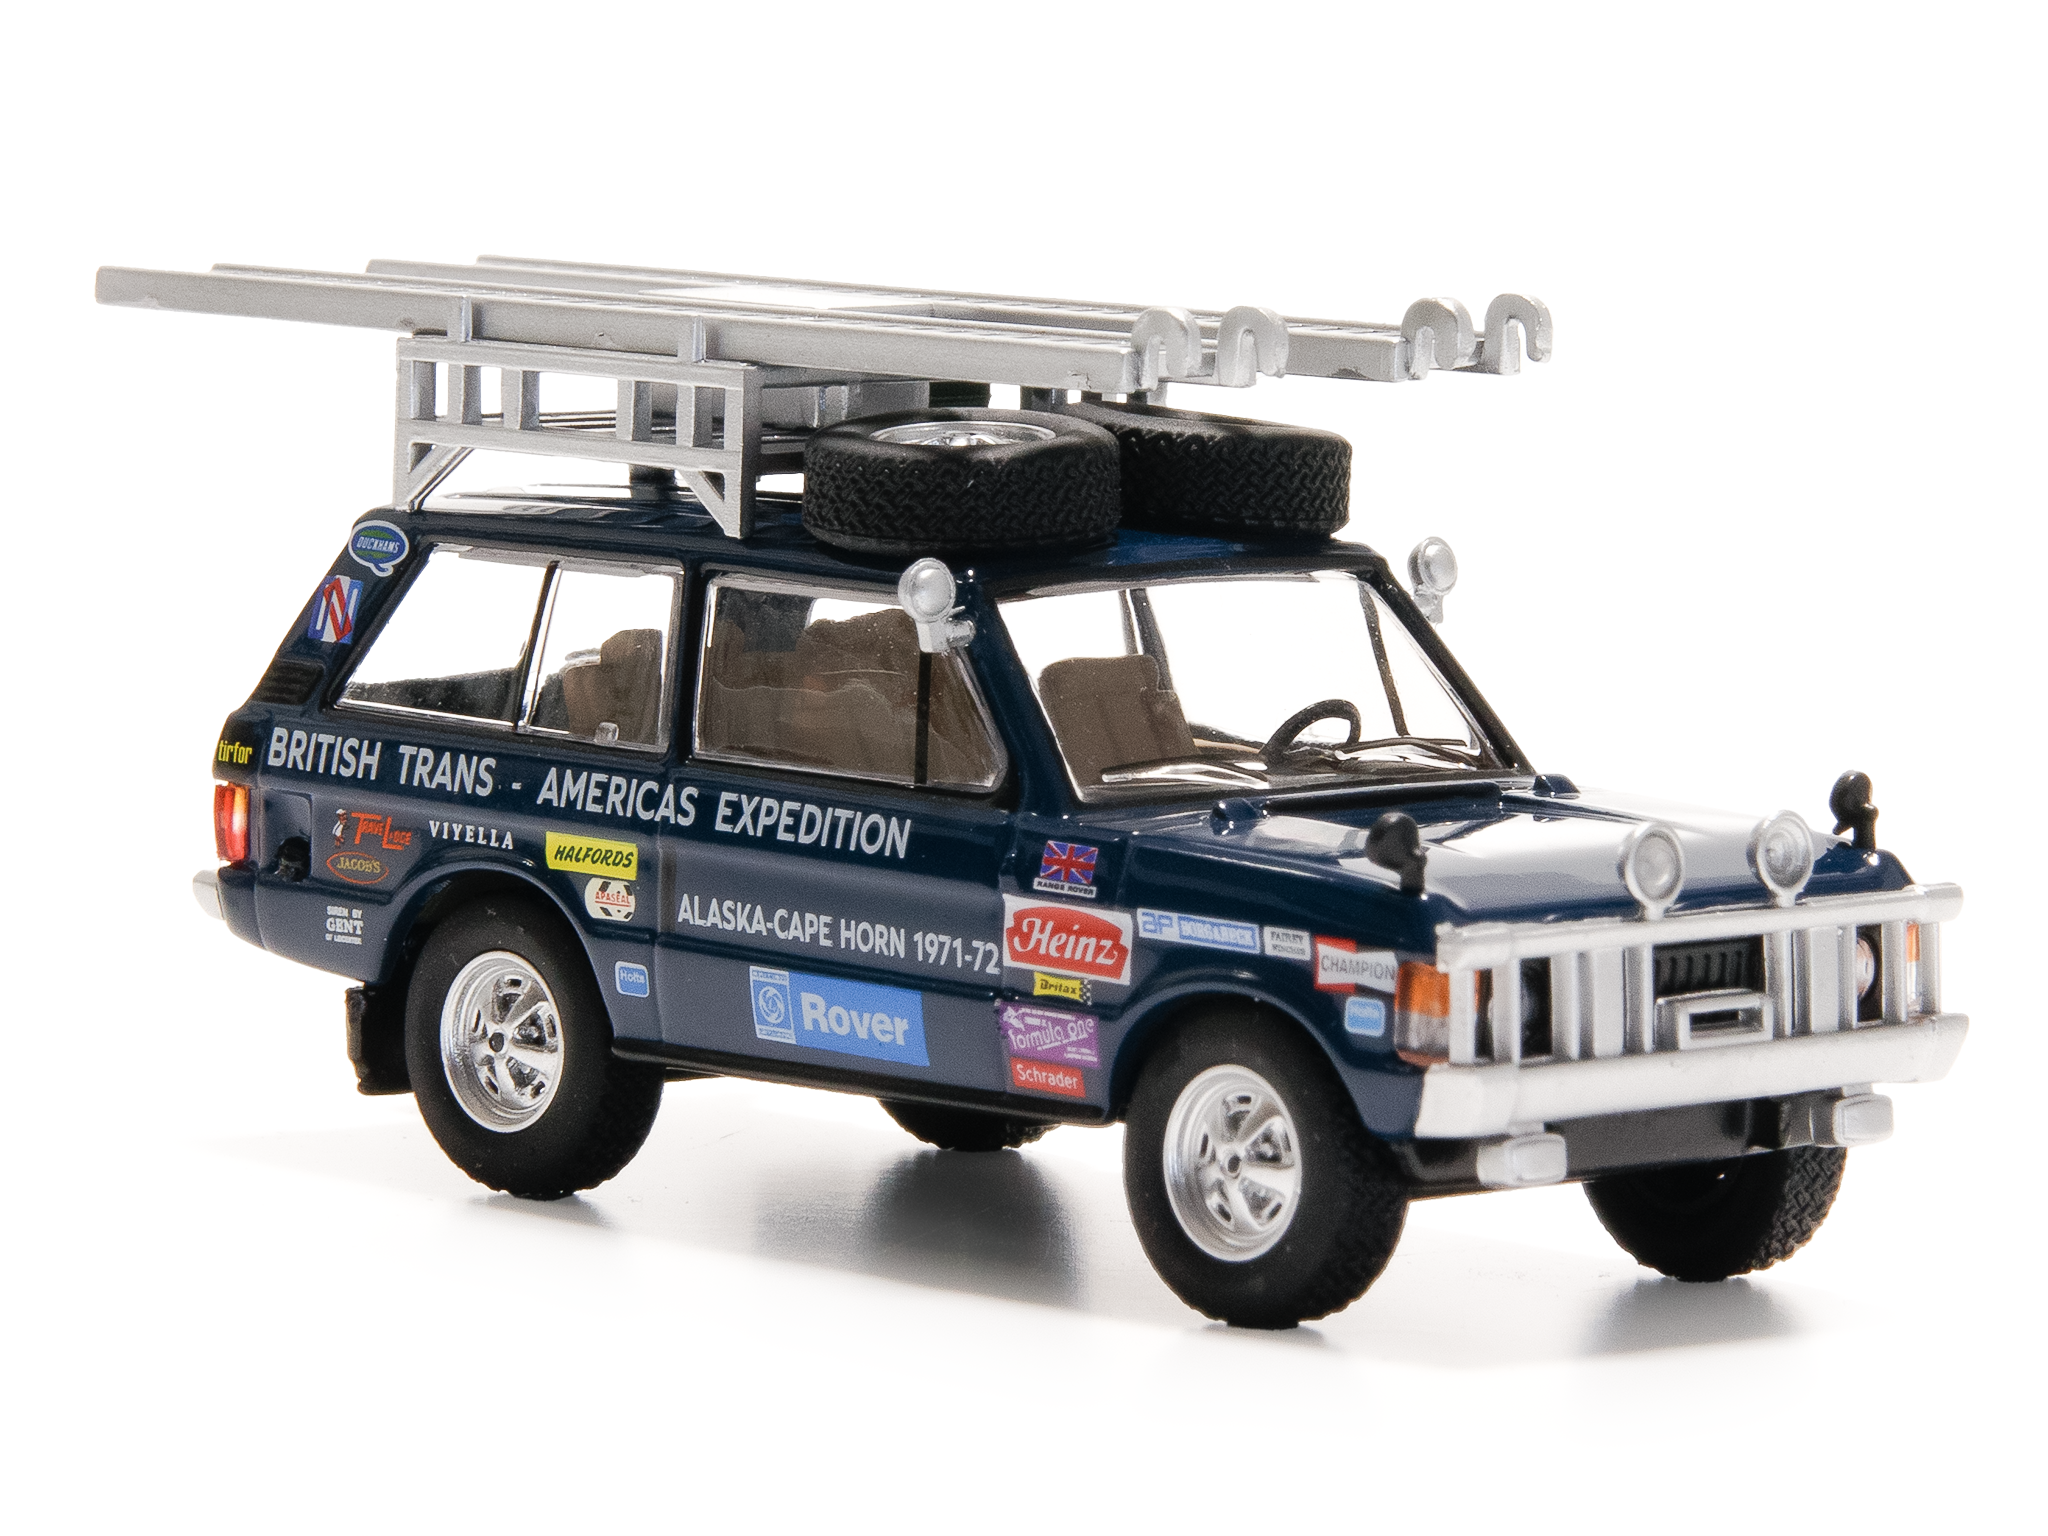 Land Rover Range Rover (VXC-868K) British Trans-Americas Expedition 1971 - 1:64 Scale Diecast Model Car